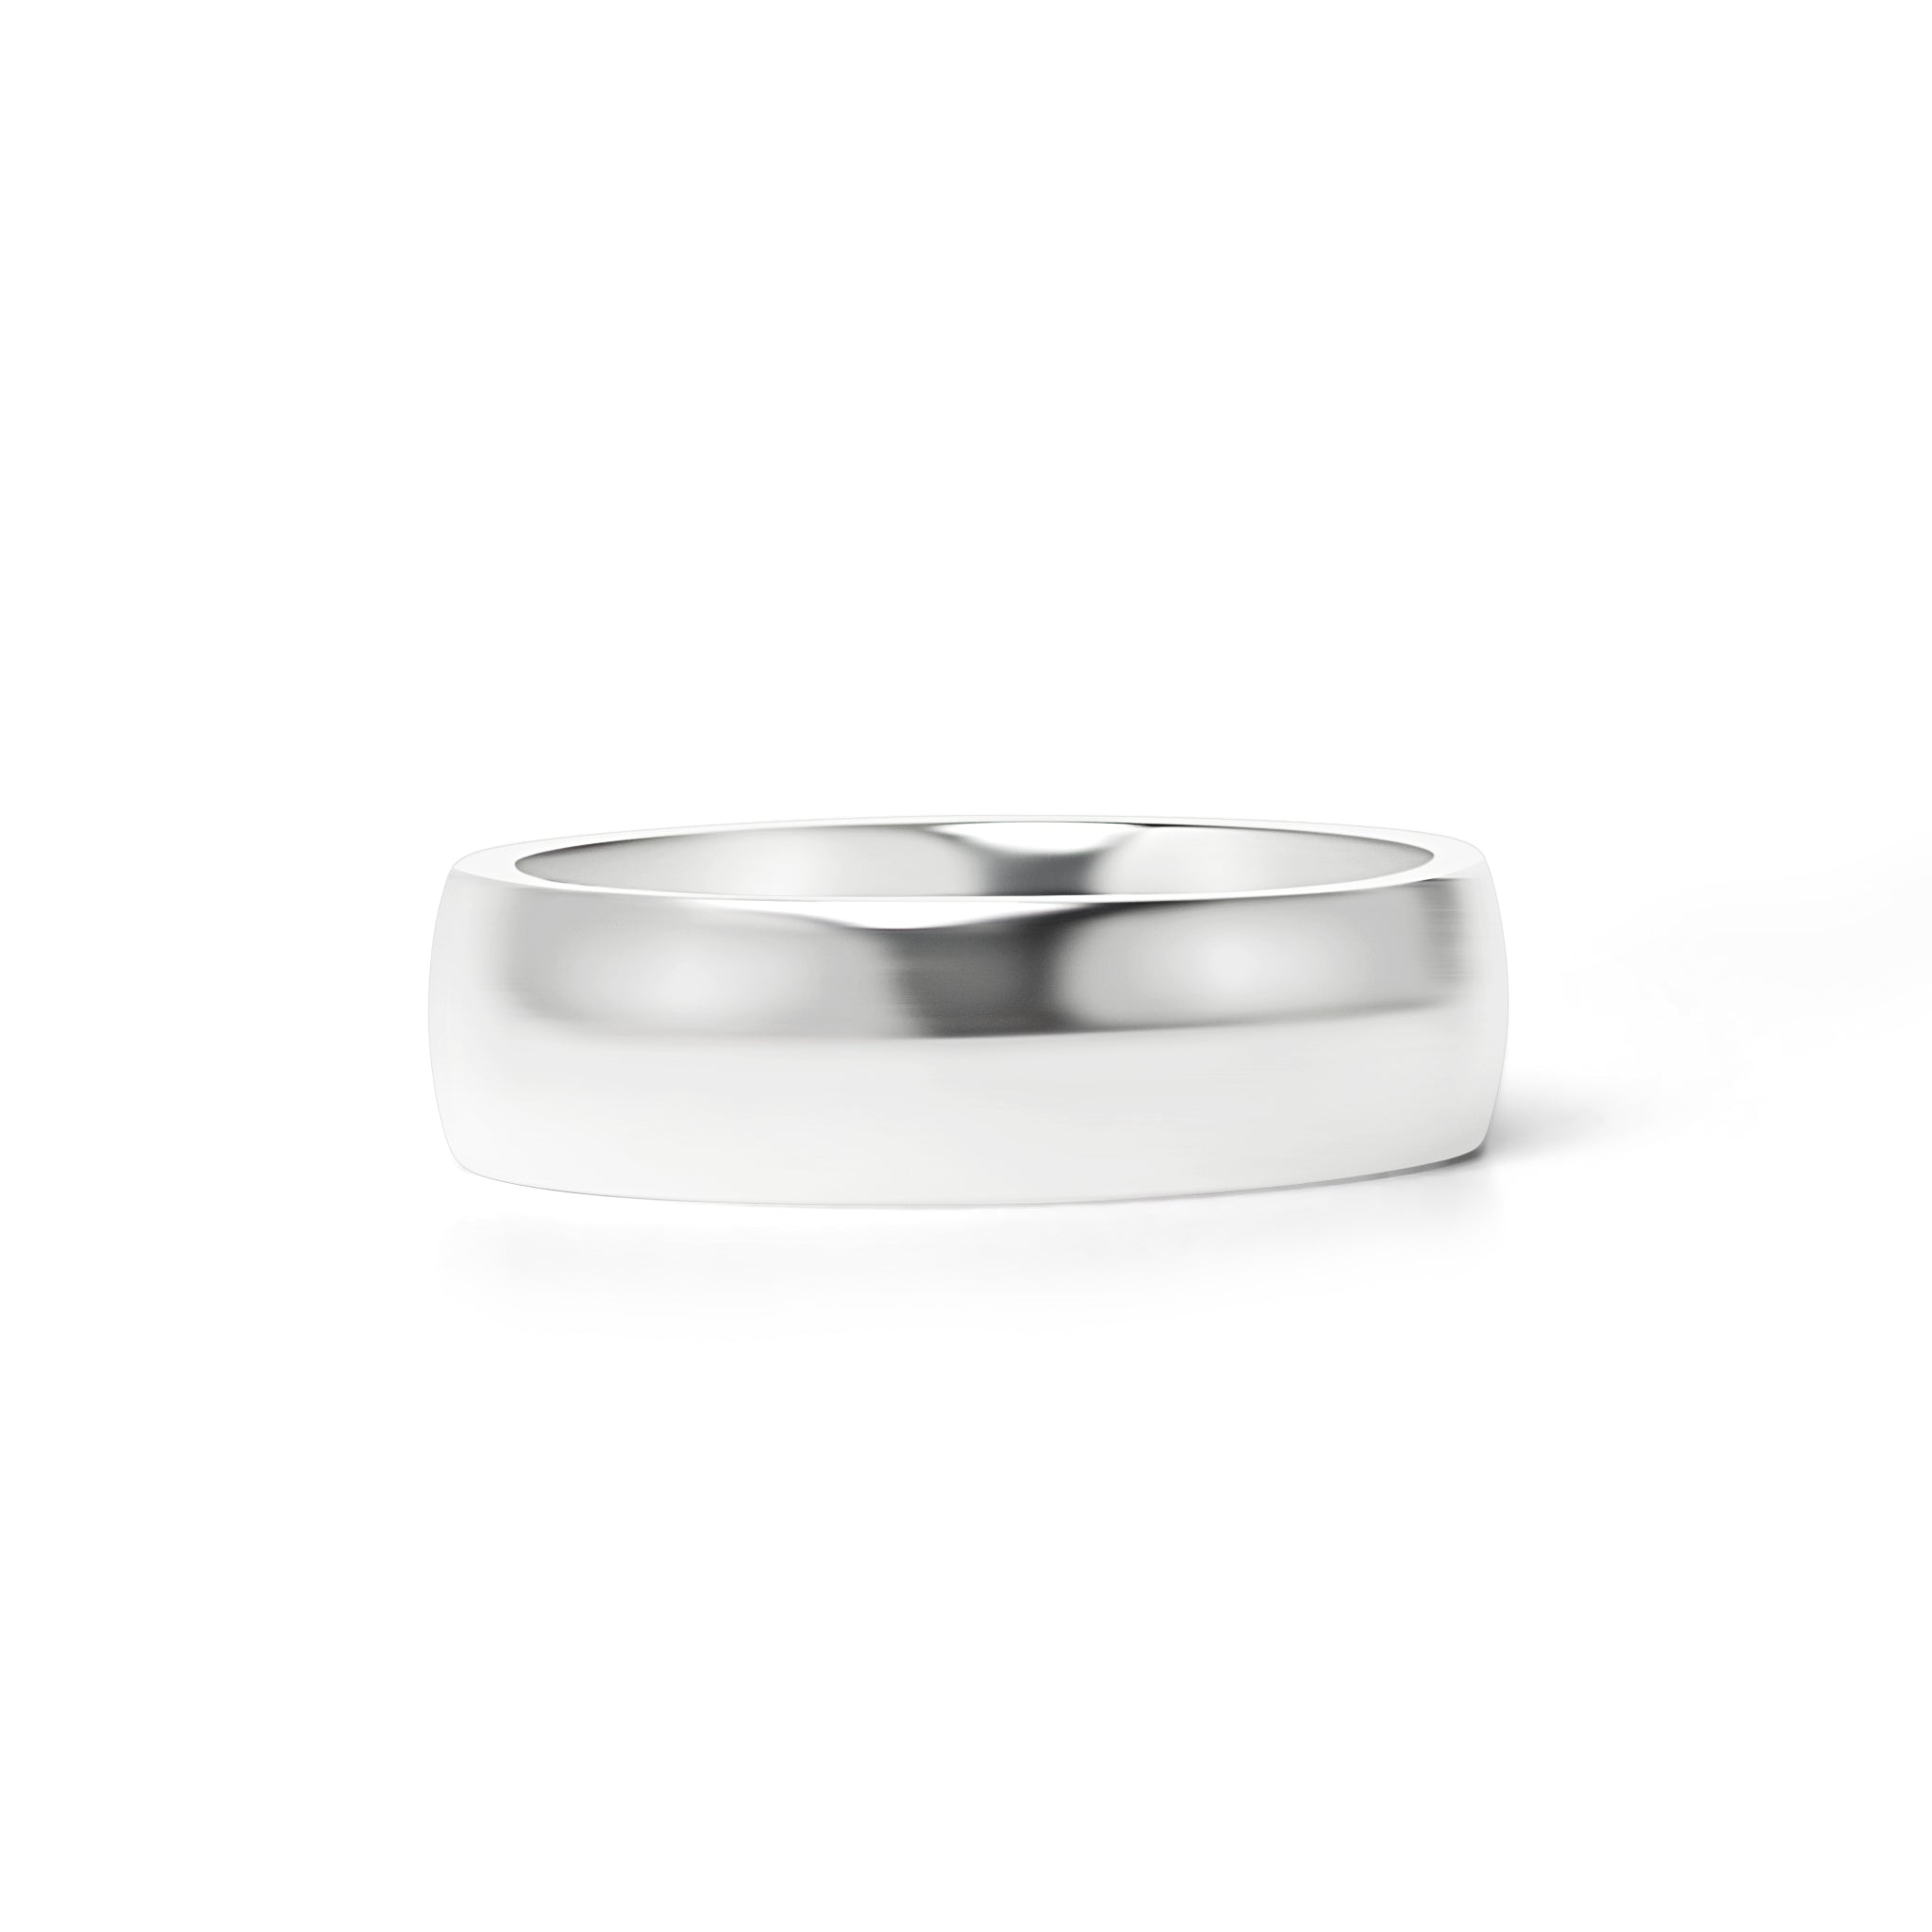 Rings Black Center Polished Stainless Steel Ring Cfr7028 6mm / 7 Wholesale Jewelry Website 7 Unisex